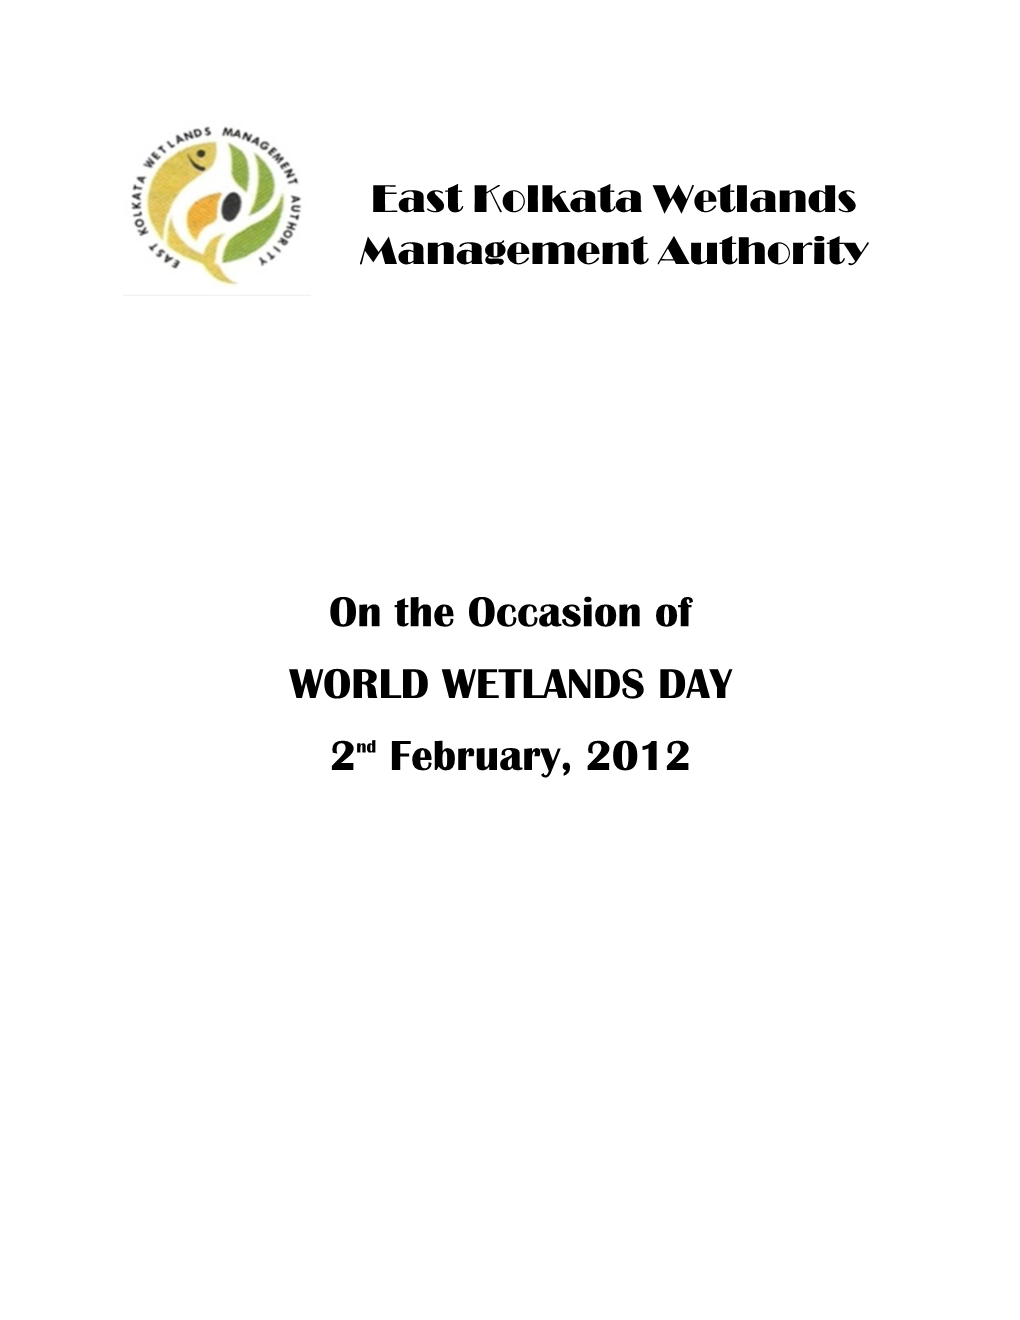 On the Occasion of WORLD WETLANDS DAY 2Nd February, 2012